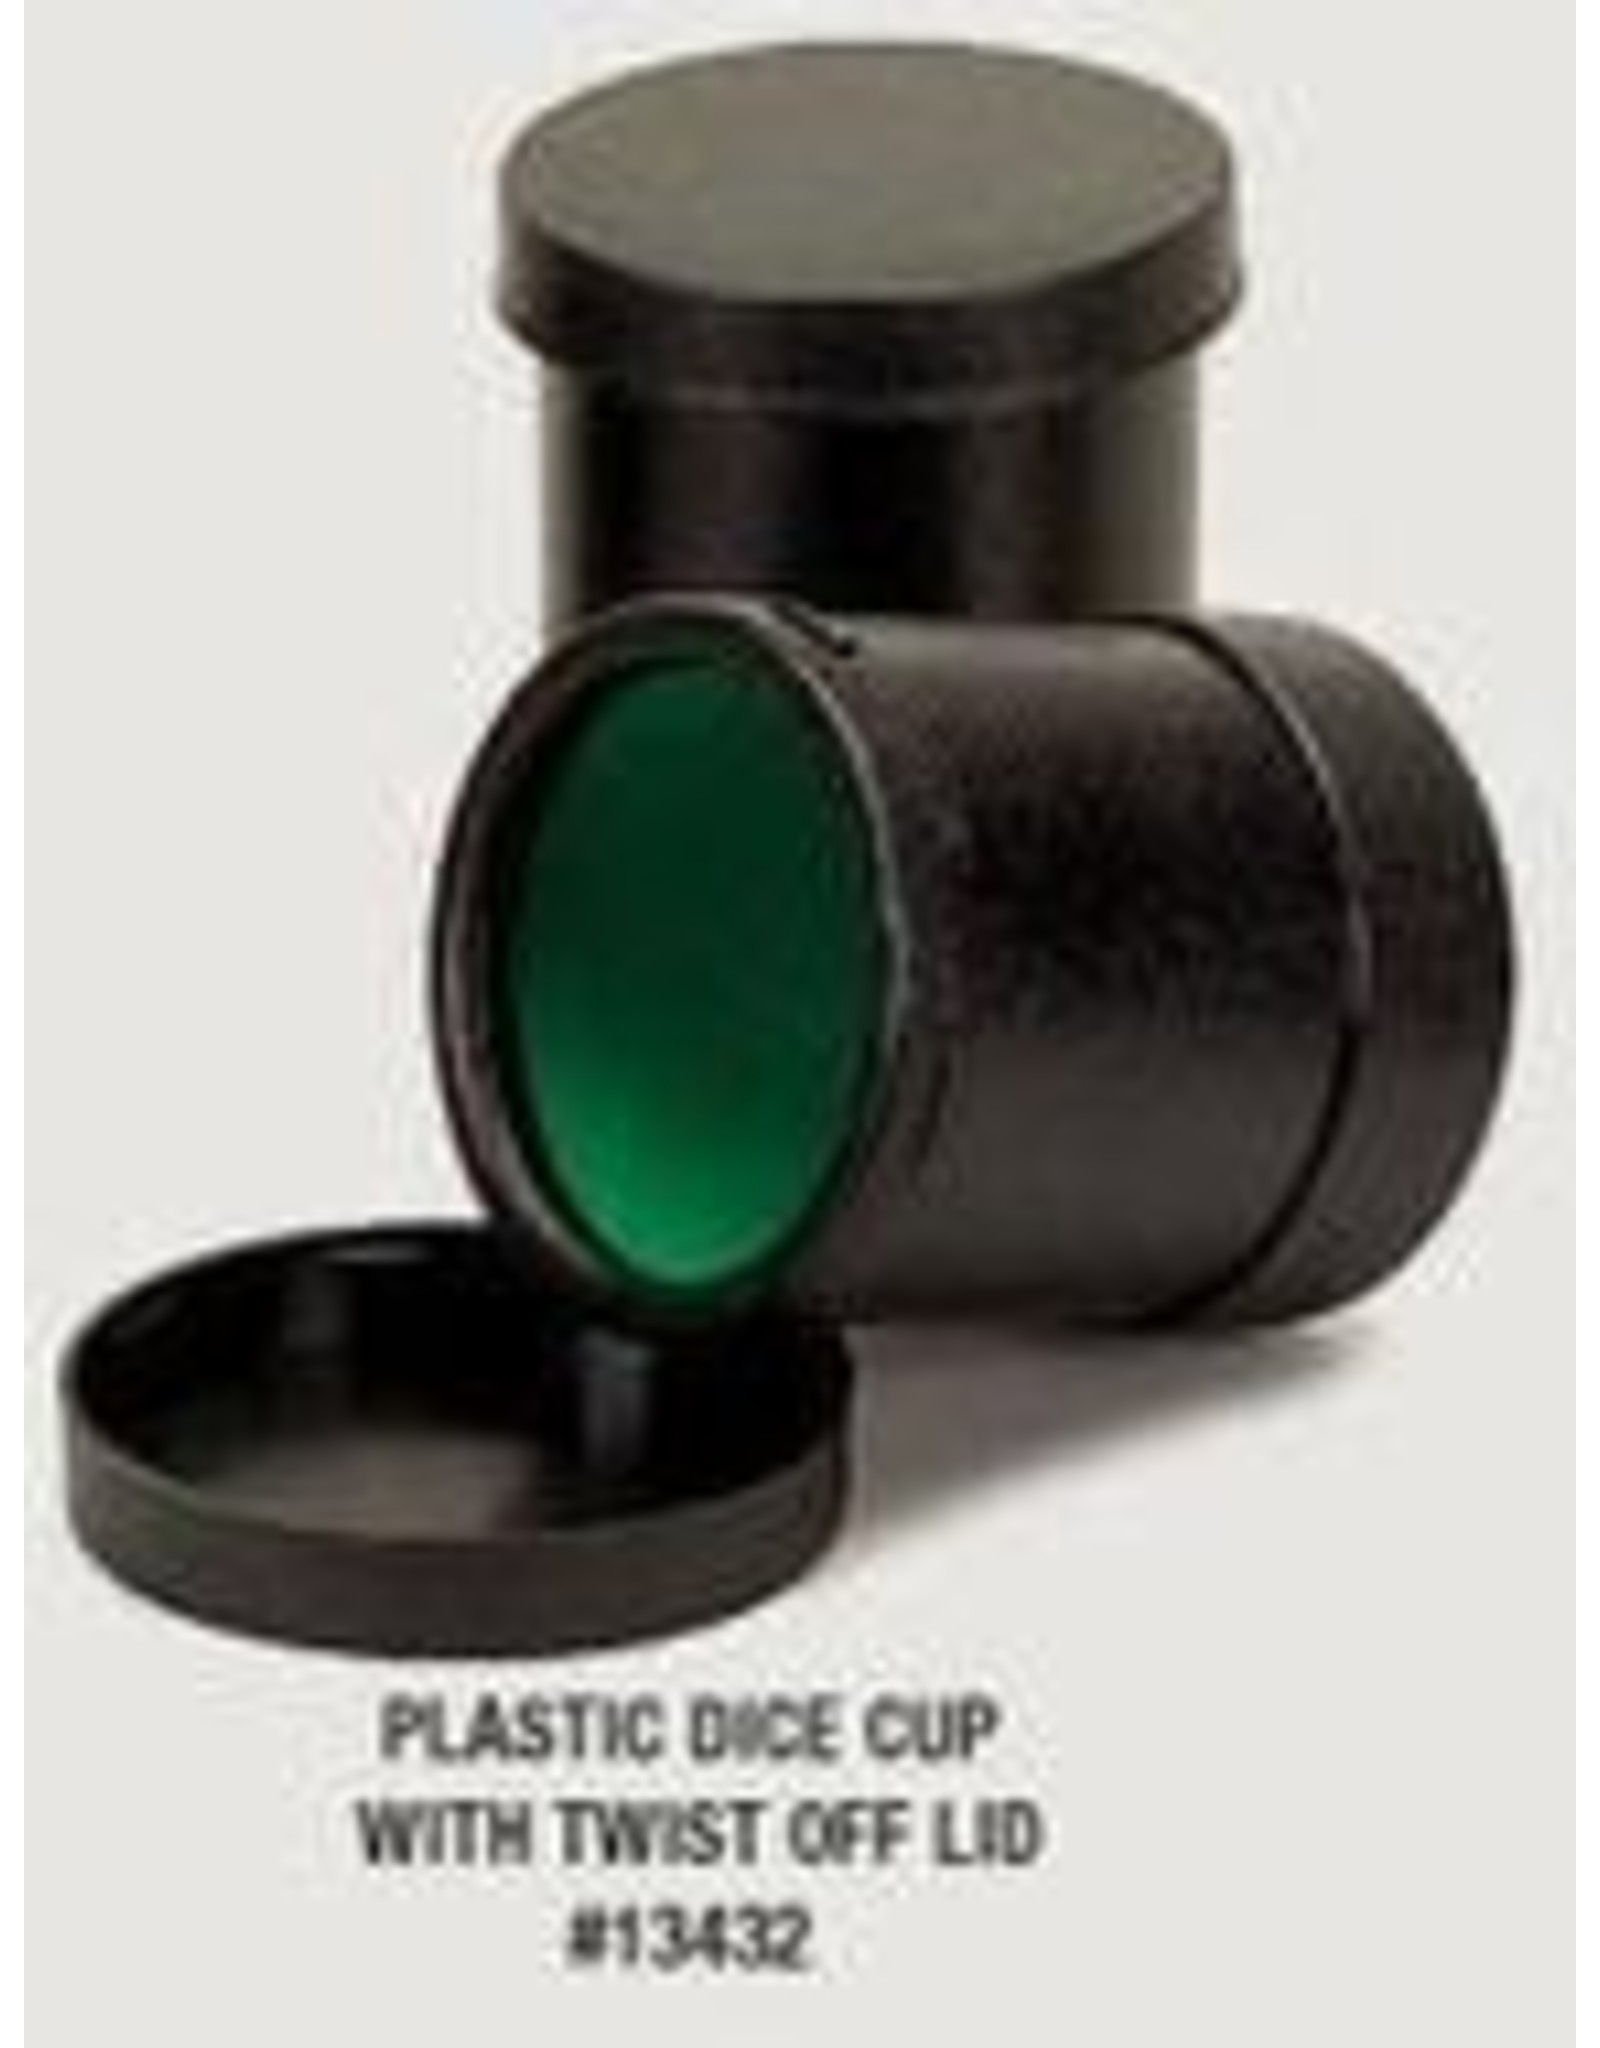 Koplow Plastic Round Dice Cup With Twist Cover